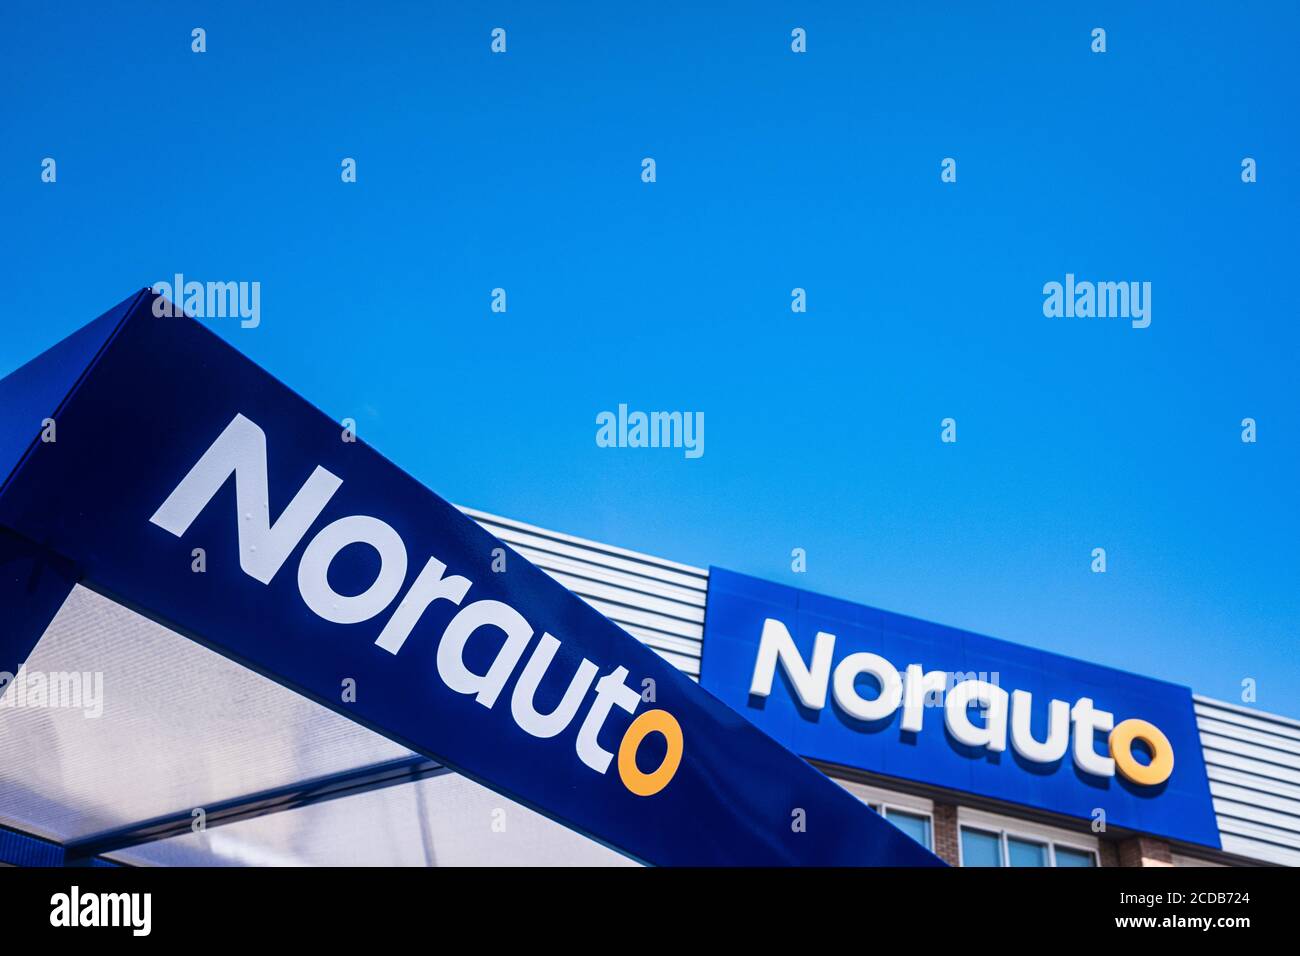 Valencia, Spain - August 26, 2020: Emblem of the chain of fast car repair shops Norauto. Stock Photo